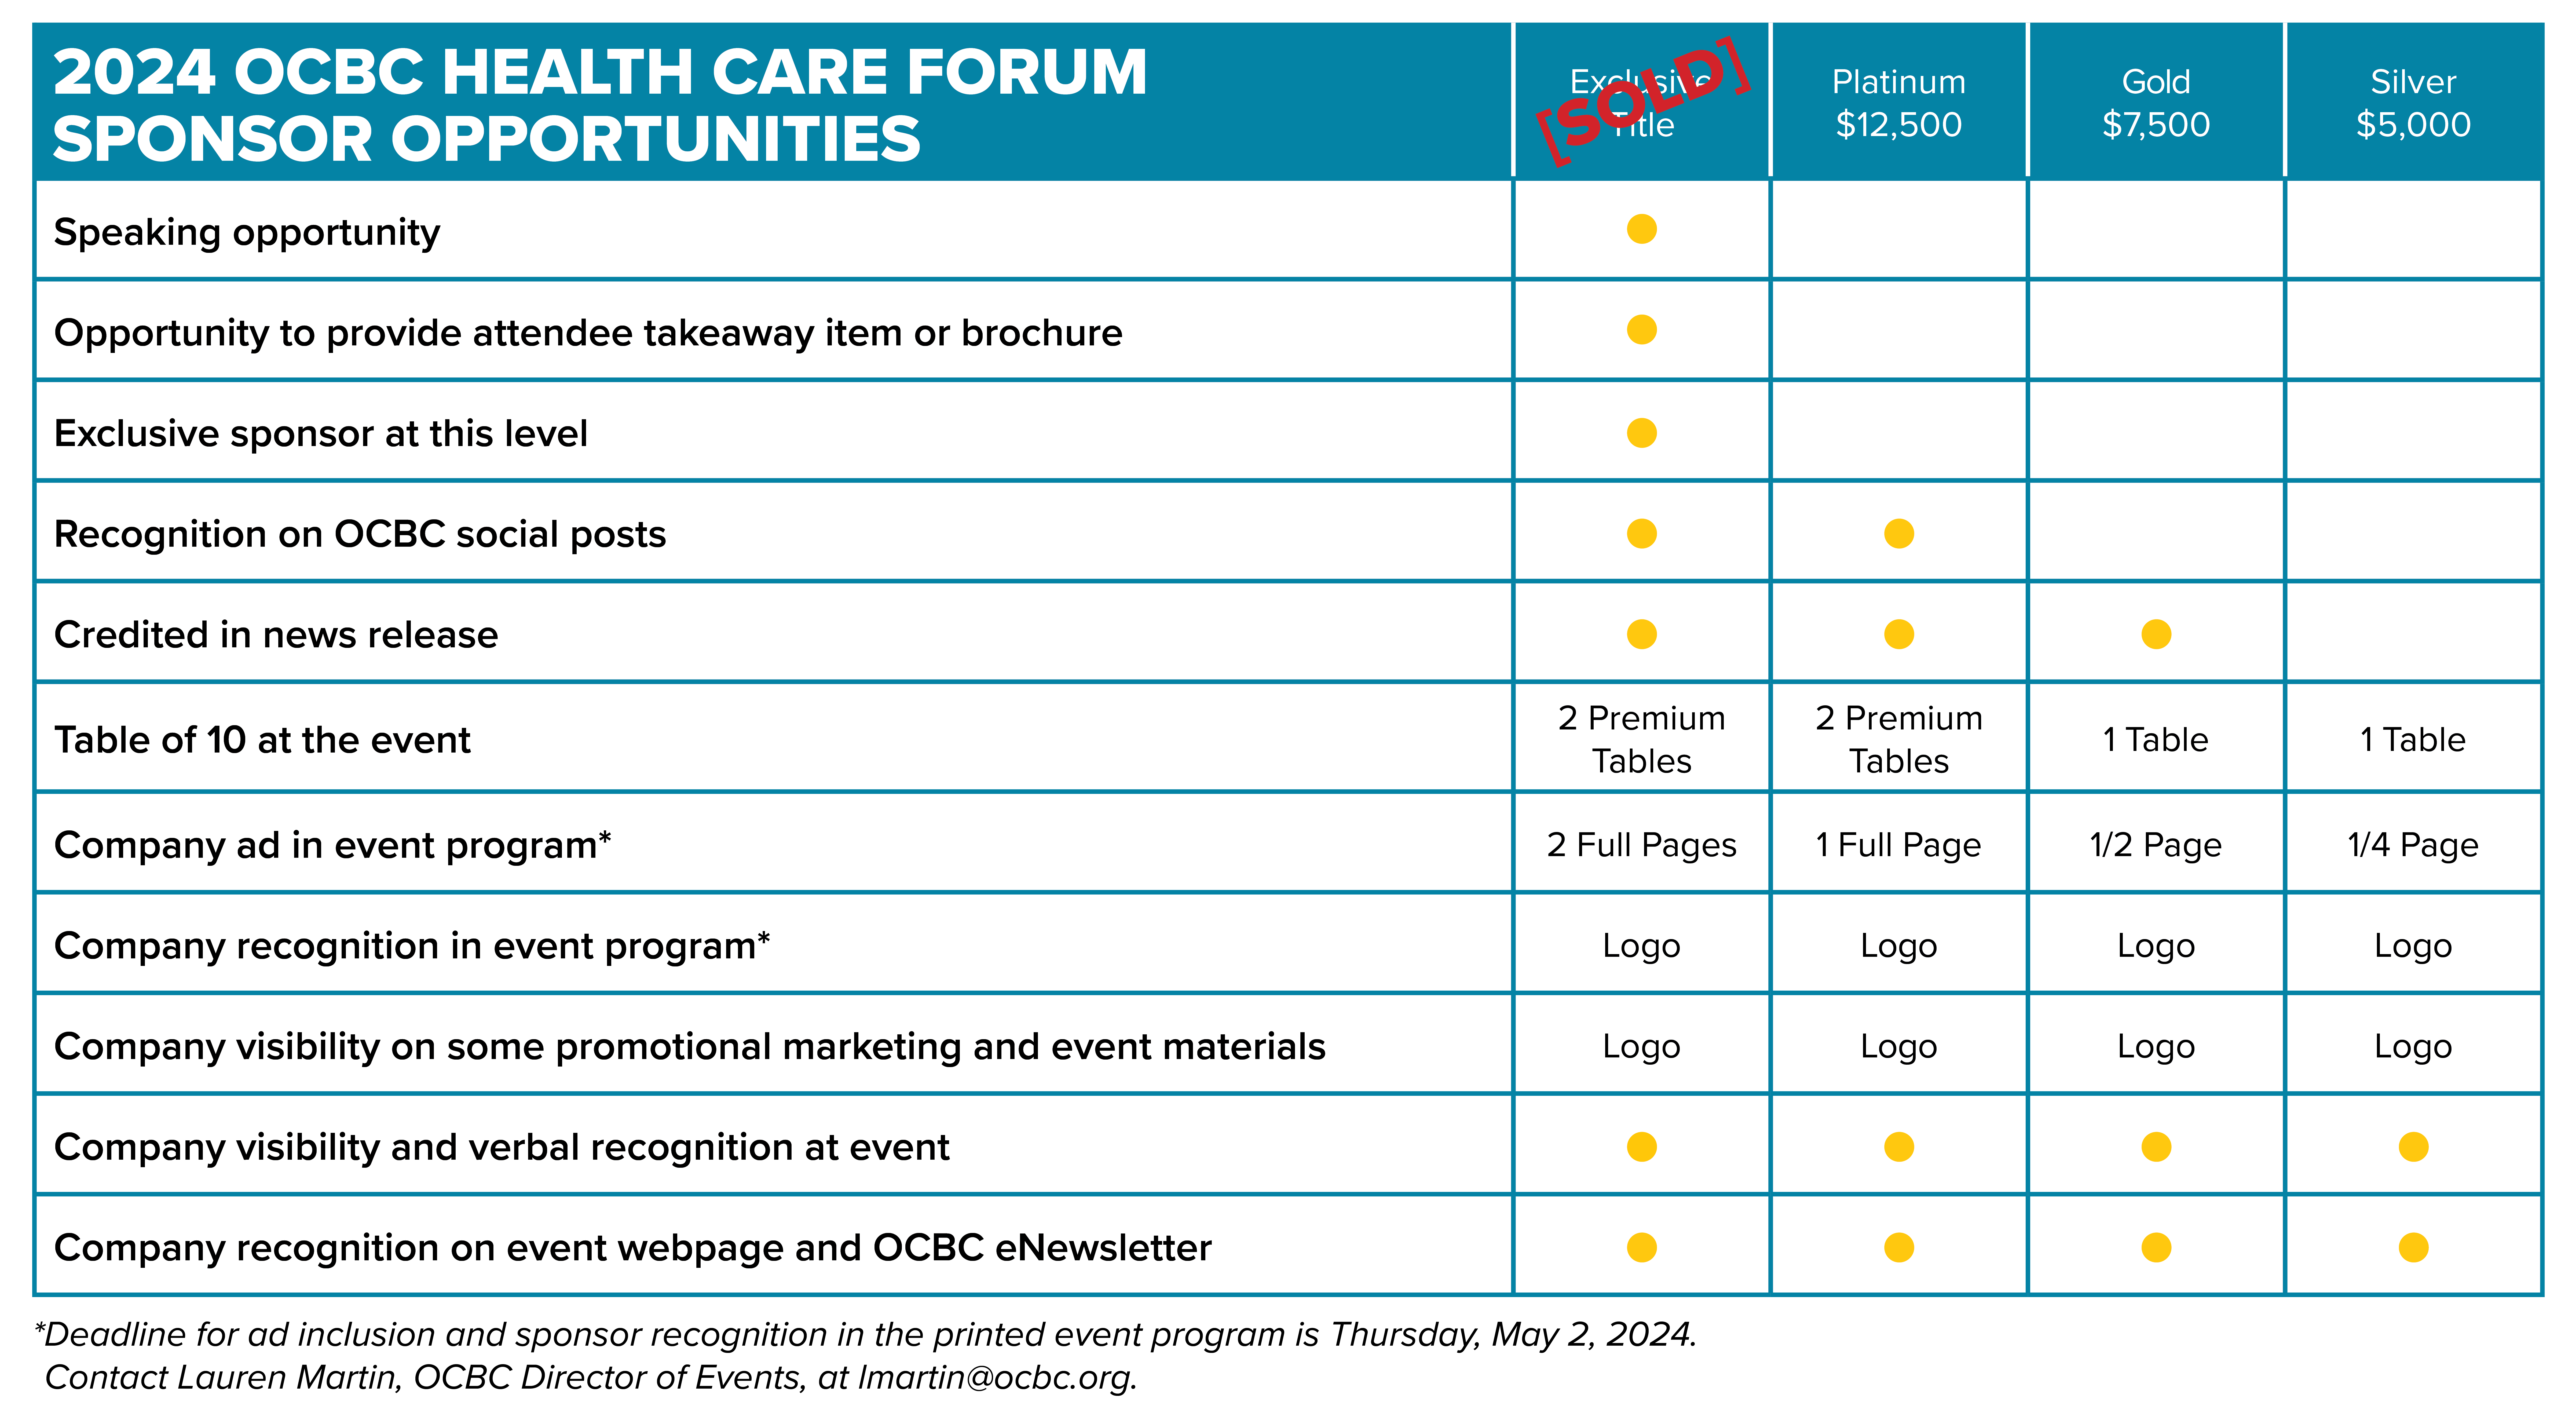 2024 OCBC Health Care Forum Sponsor Opportunities: Exclusive Title Sponsor, includes speaking opportunity, opportunity to provide attendee takeaway item or brochure, exclusive sponsor at this level, recognition on OCBC social posts, credited in news release, table of 10 at the event (2 premium tables), 2 full page ads in event program*, company recognition with logo in event program*, company visibility on some promotional marketing and event materials via logo, company visibility and verbal recognition at event, and company recognition on event webpage and OCBC eNewsletter. Platinum Sponsor, includes recognition on OCBC social posts, credited in news release, table of 10 at the event (2 premium tables), 1 full page ad in event program*, company recognition with logo in event program*, company visibility on some promotional marketing and event materials via logo, company visibility and verbal recognition at event, and company recognition on event webpage and OCBC eNewsletter. Gold Sponsor, includes being credited in news release, table of 10 at the event (1 table), 1 half page ad in event program*, company recognition with logo in event program*, company visibility on some promotional marketing and event materials via logo, company visibility and verbal recognition at event, and company recognition on event webpage and OCBC eNewsletter. Silver Sponsor, includes being a table of 10 at the event (1 table), 1 quarter page ad in event program*, company recognition with logo in event program*, company visibility on some promotional marketing and event materials via logo, company visibility and verbal recognition at event, and company recognition on event webpage and OCBC eNewsletter. *Deadline for ad inclusion and sponsor recognition in the printed event program is Thursday, May 2, 2024. Contact Lauren Martin, OCBC Director of Events, at lmartin@ocbc.org.